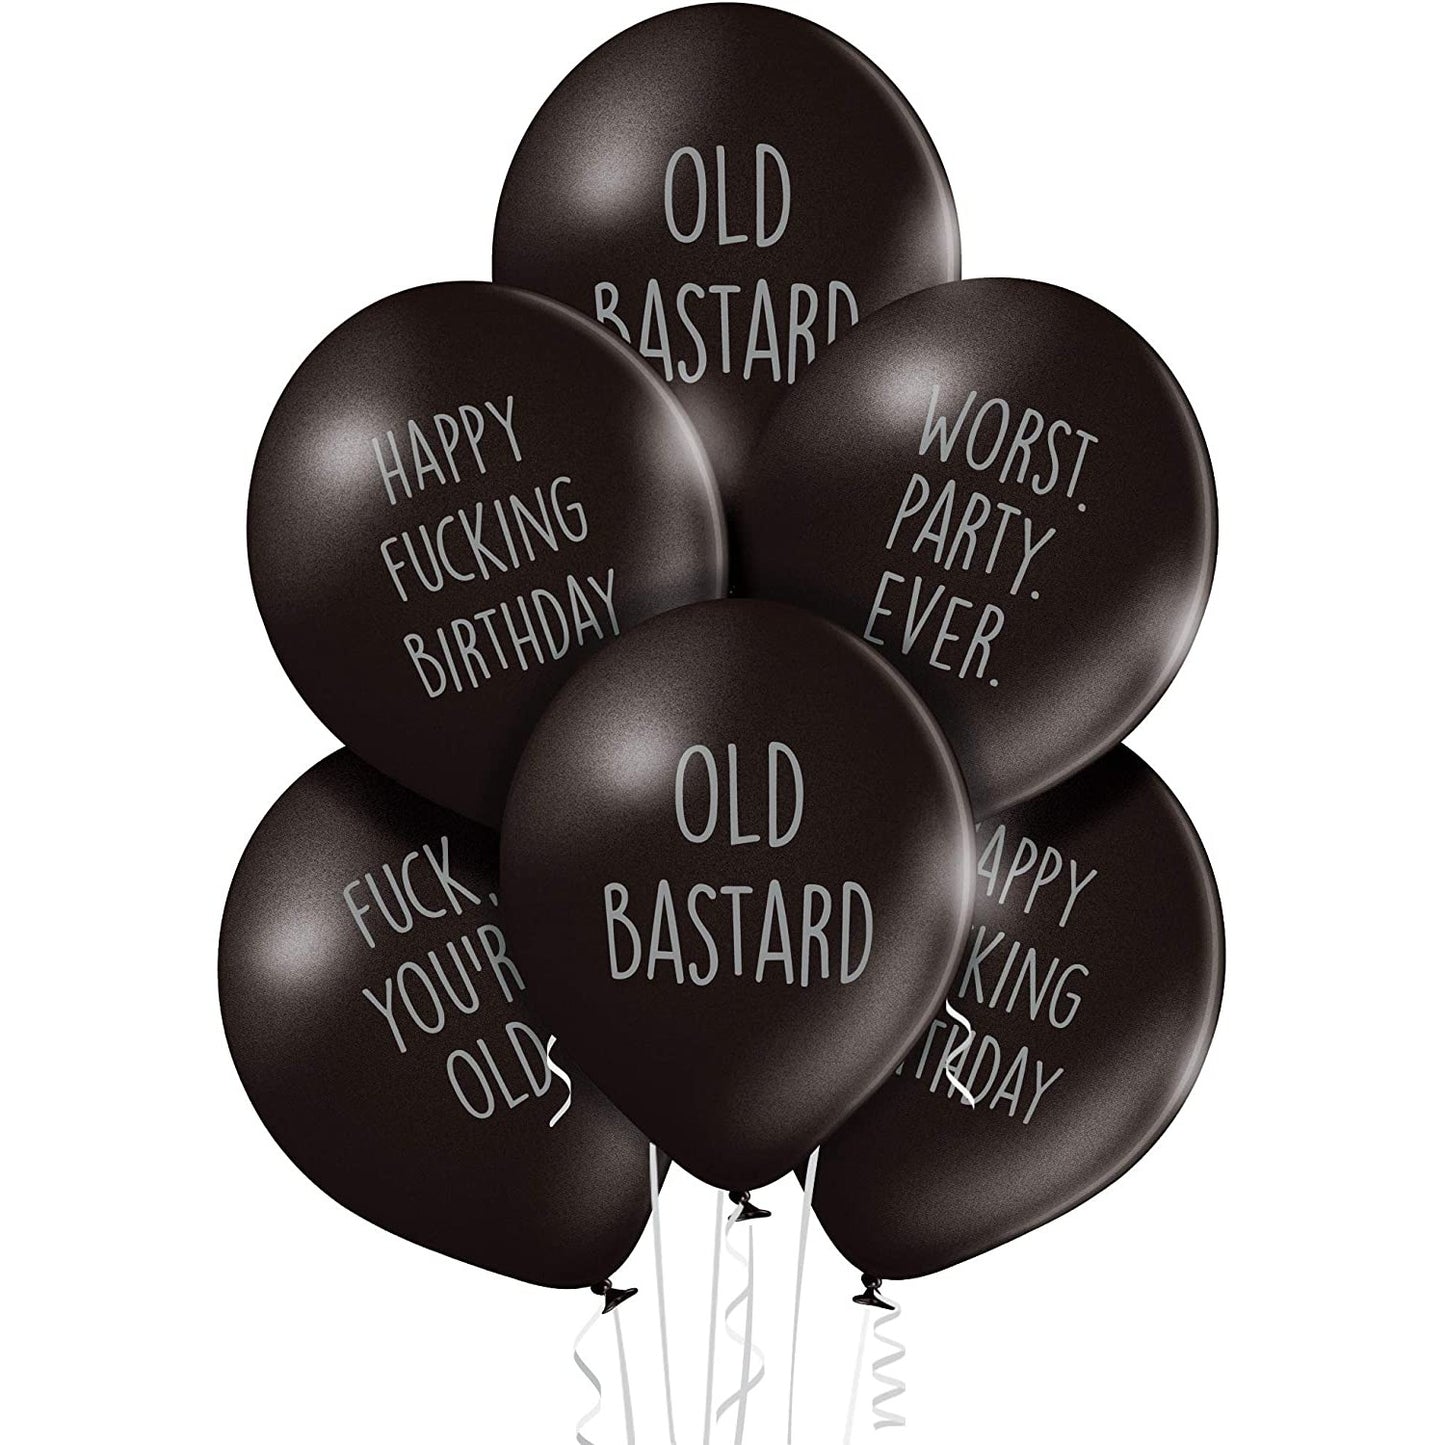 Abusive Balloons - oddgifts.com